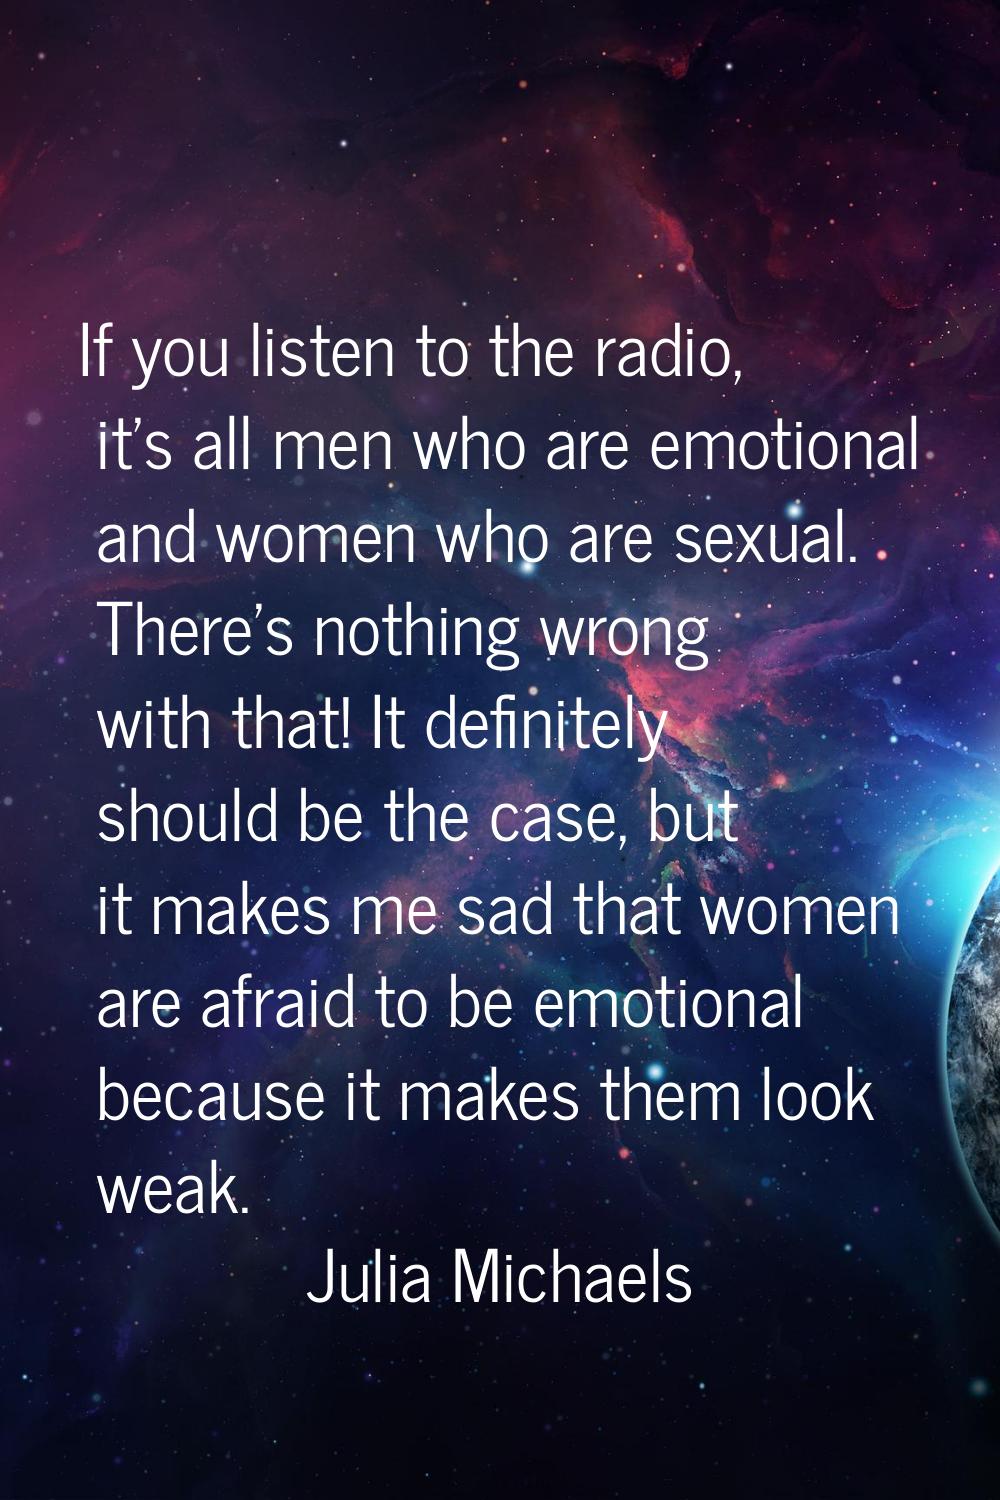 If you listen to the radio, it's all men who are emotional and women who are sexual. There's nothin